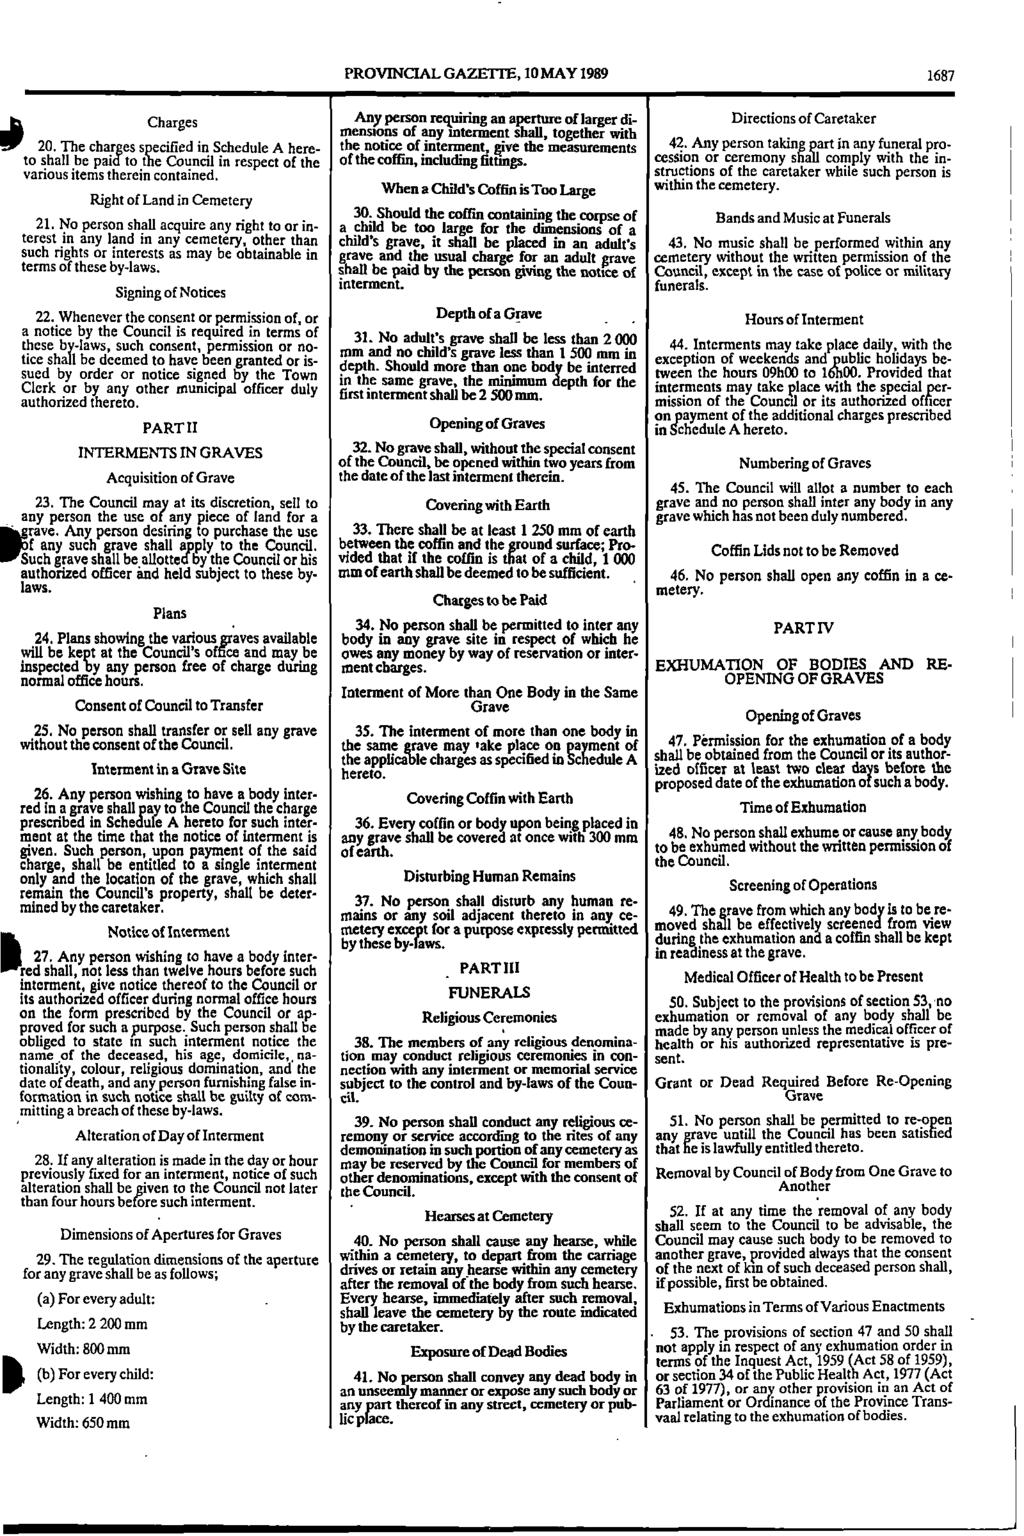 1 i 0 PROVINCIAL GAZETTE, 10 MAY 1989 1687 Charges person requiring an aperture of larger dimensions of any interment shall, together with of Caretaker 20.